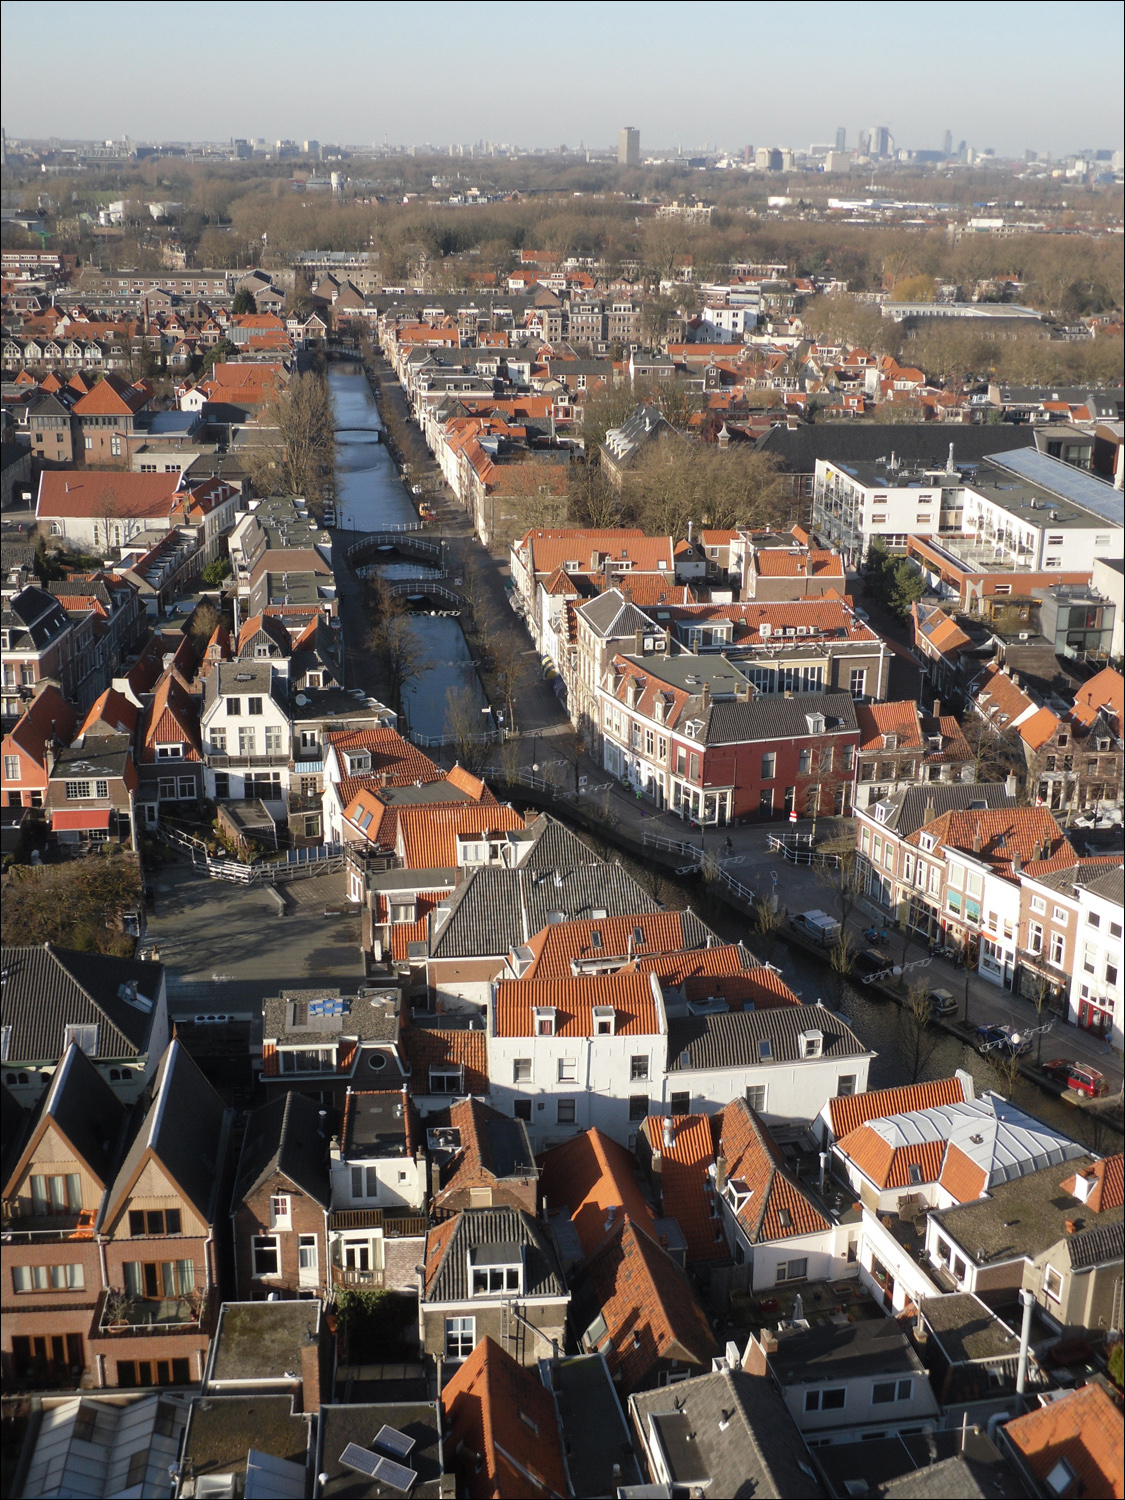 Views from the top of the clock tower on Nieuwe Kerk- One of many canals